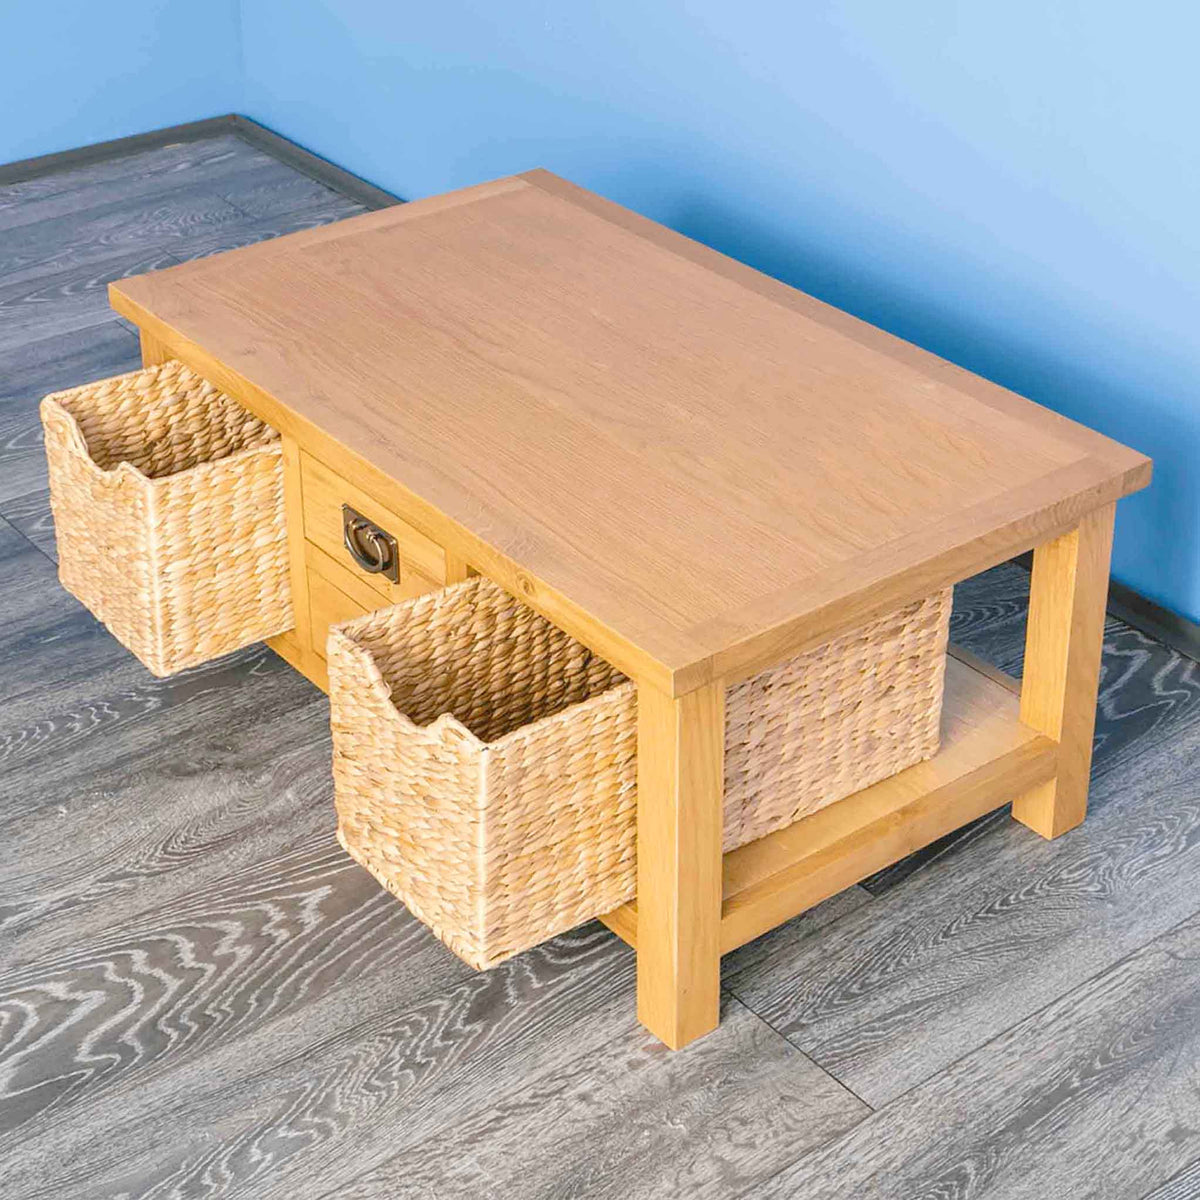 Surrey Oak Coffee Table with Baskets - Lifestyle looking down on table with baskets out